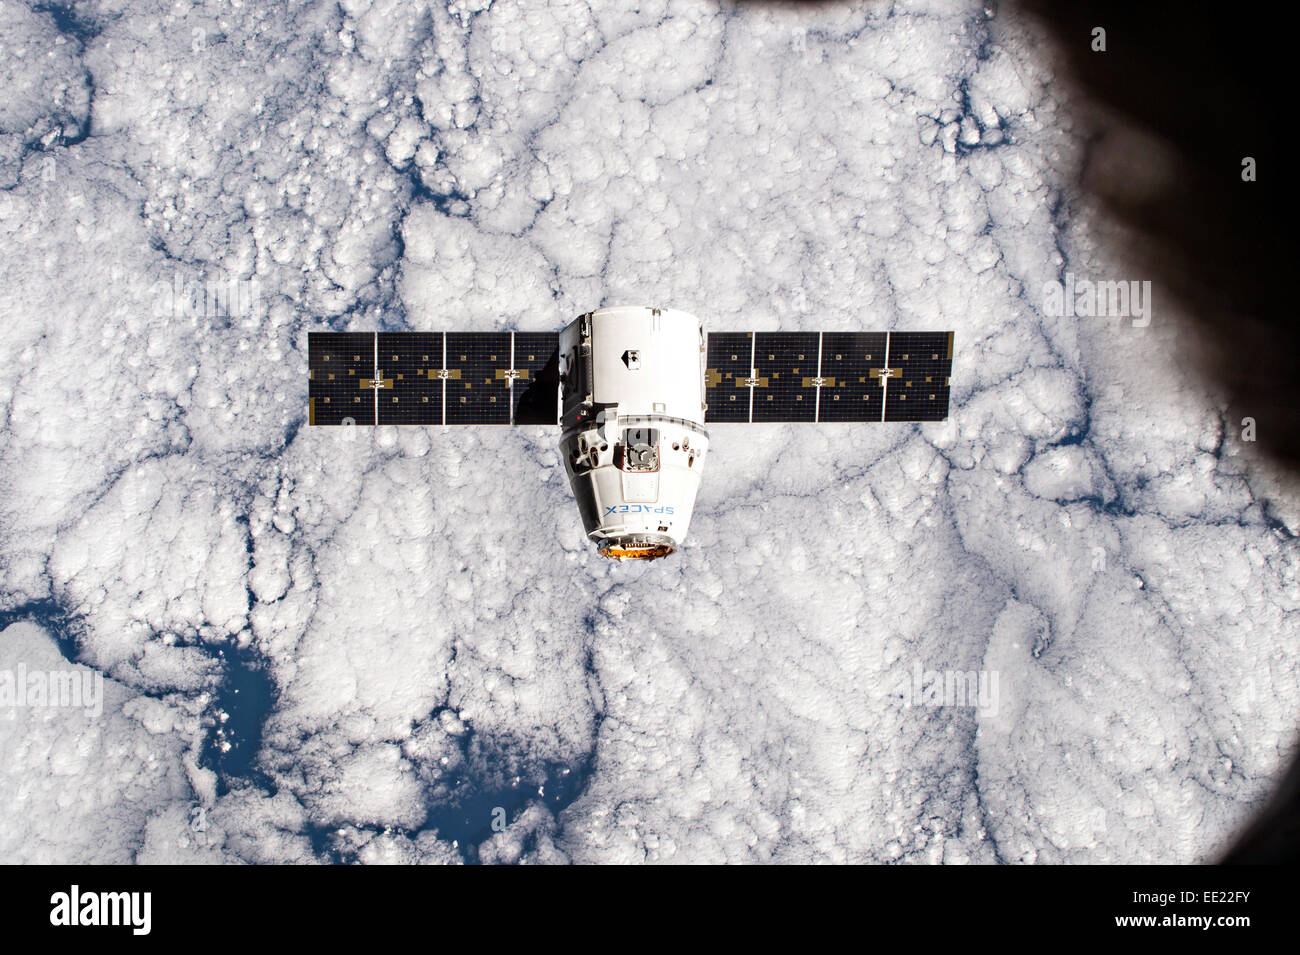 The SpaceX Dragon commercial cargo craft approaches the International Space Station for grapple and berthing January 12, 2015 in Earth Orbit. Dragon will spend the next four weeks attached to the Harmony node as the Expedition 42 crew unloads supplies, hardware, experiments, and computer gear and equipment. Stock Photo